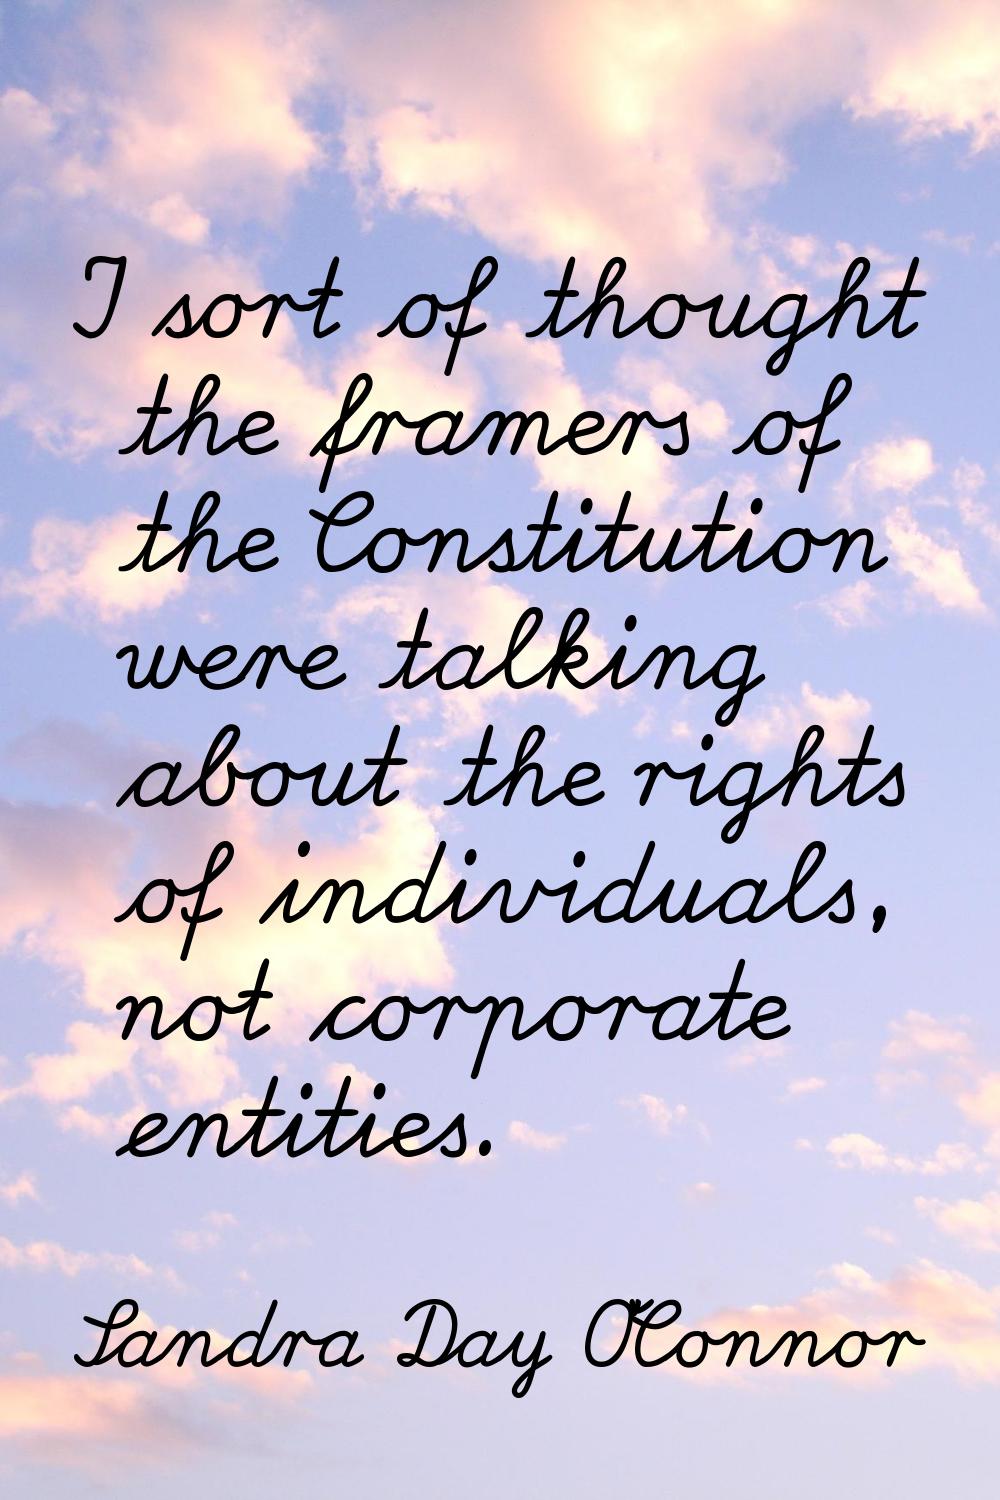 I sort of thought the framers of the Constitution were talking about the rights of individuals, not